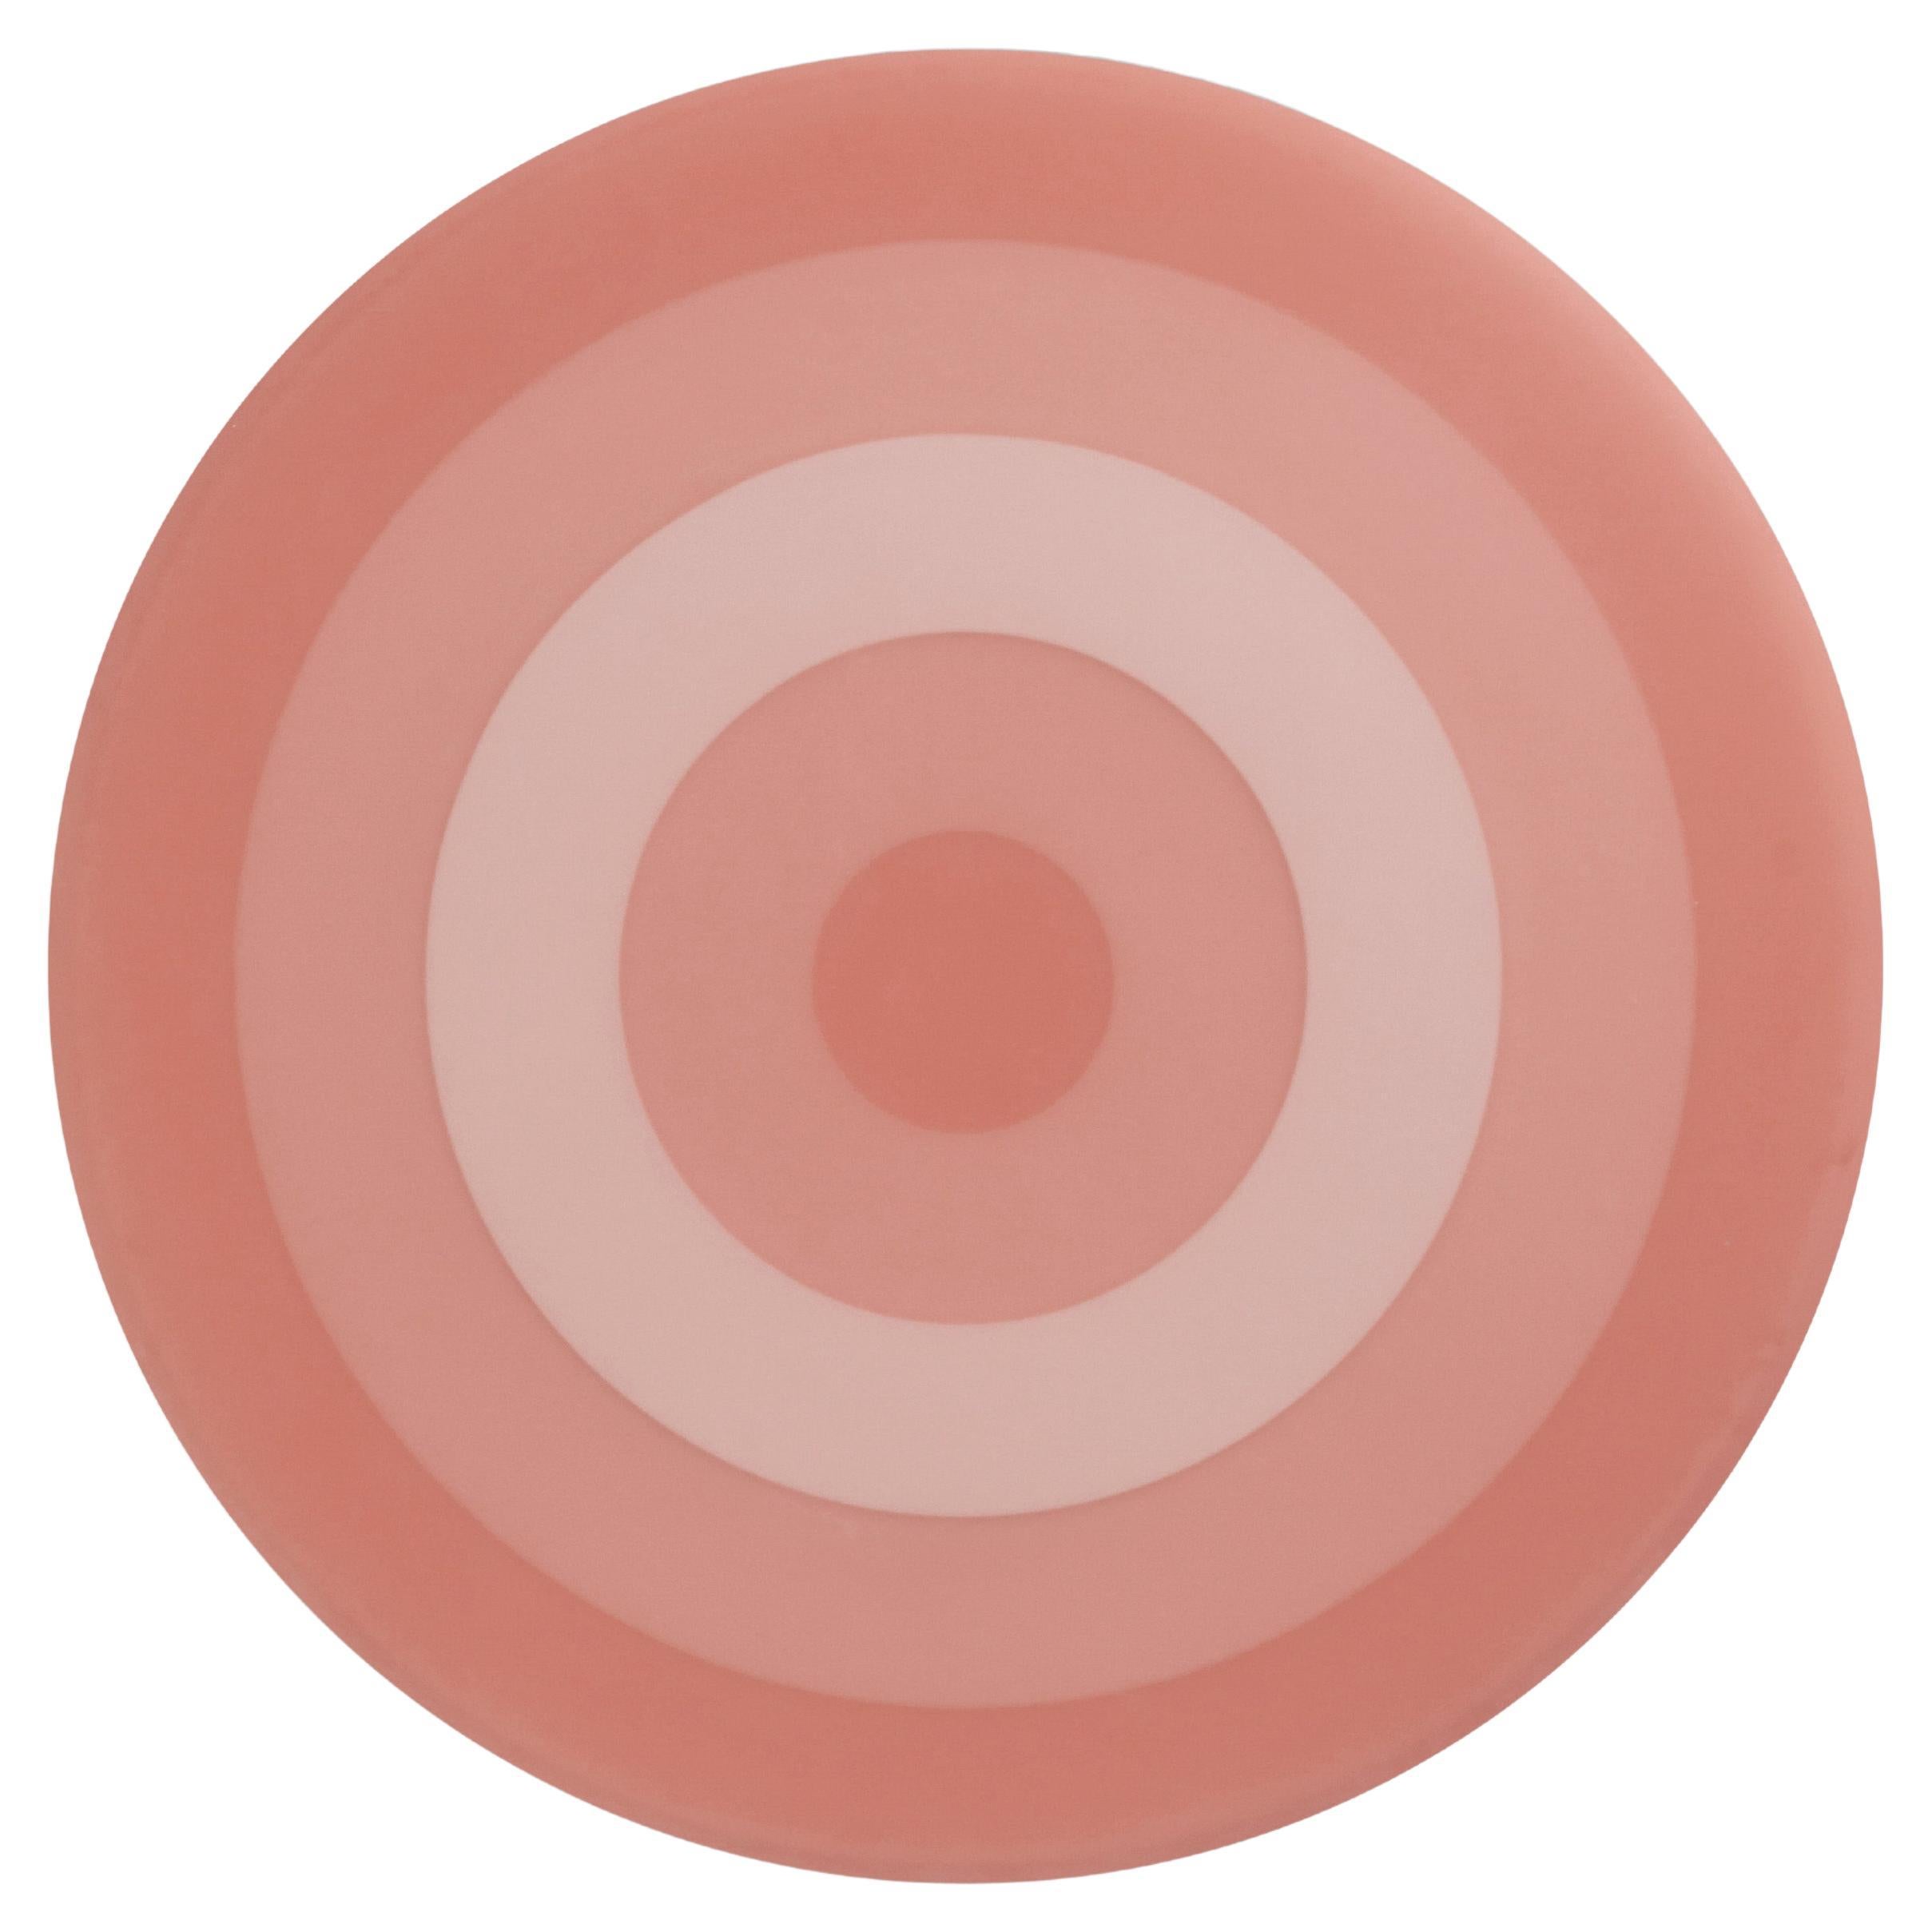 Scale Rings Resin Wall Decor In Peach by Facture, Represented by Tuleste Factory For Sale